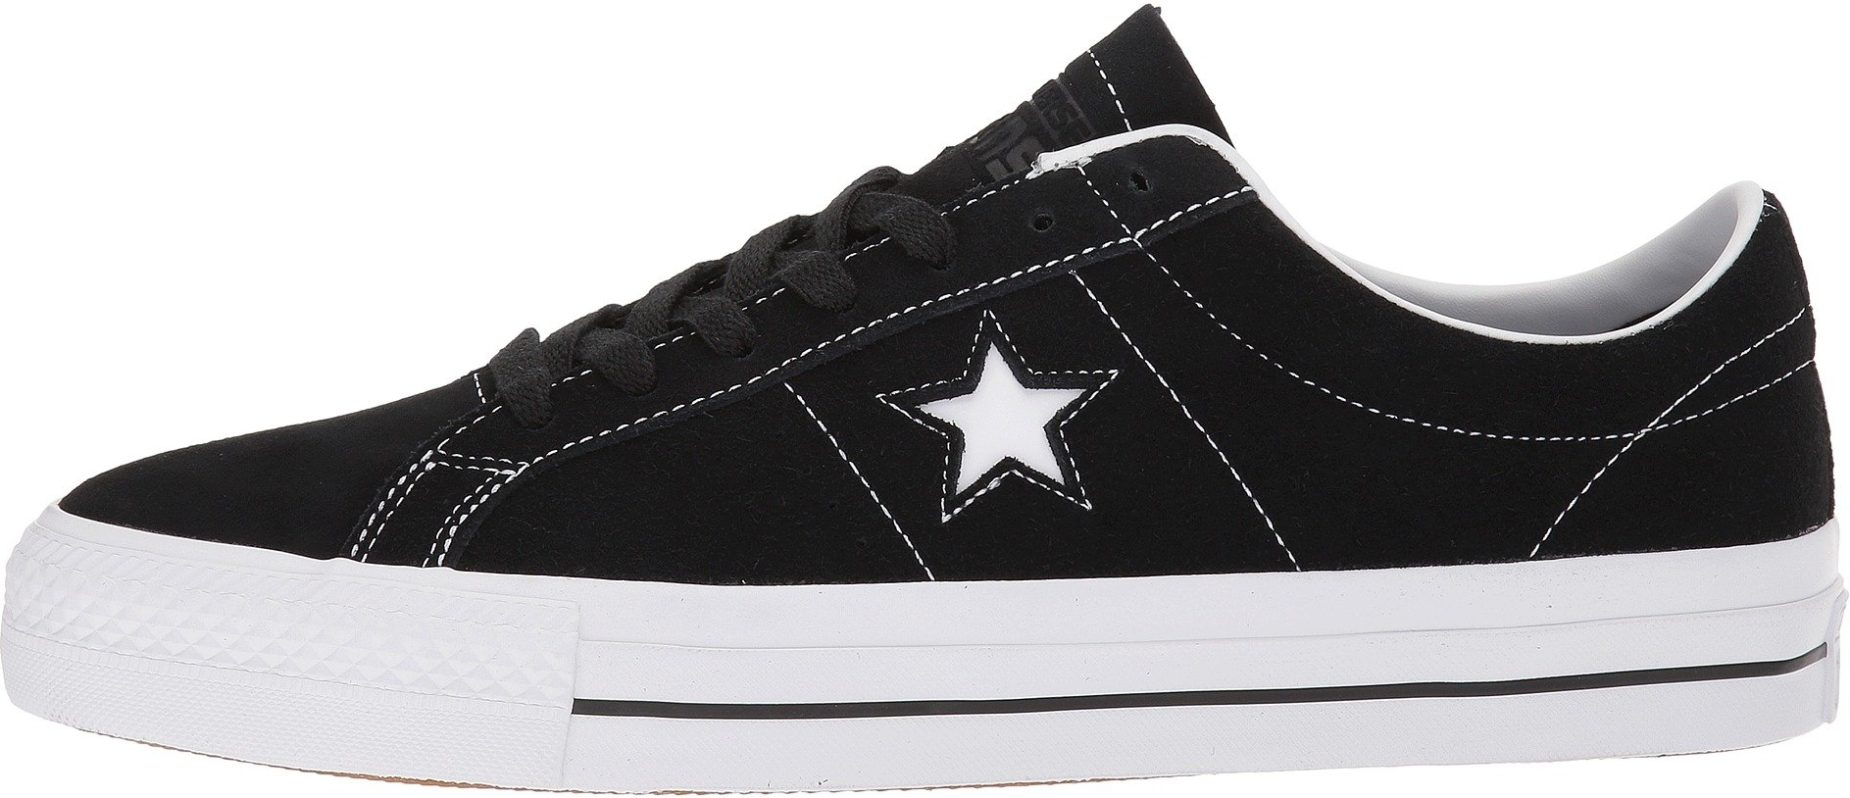 Converse CONS One Star Pro Low Top sneakers in 5 colors | RunRepeat